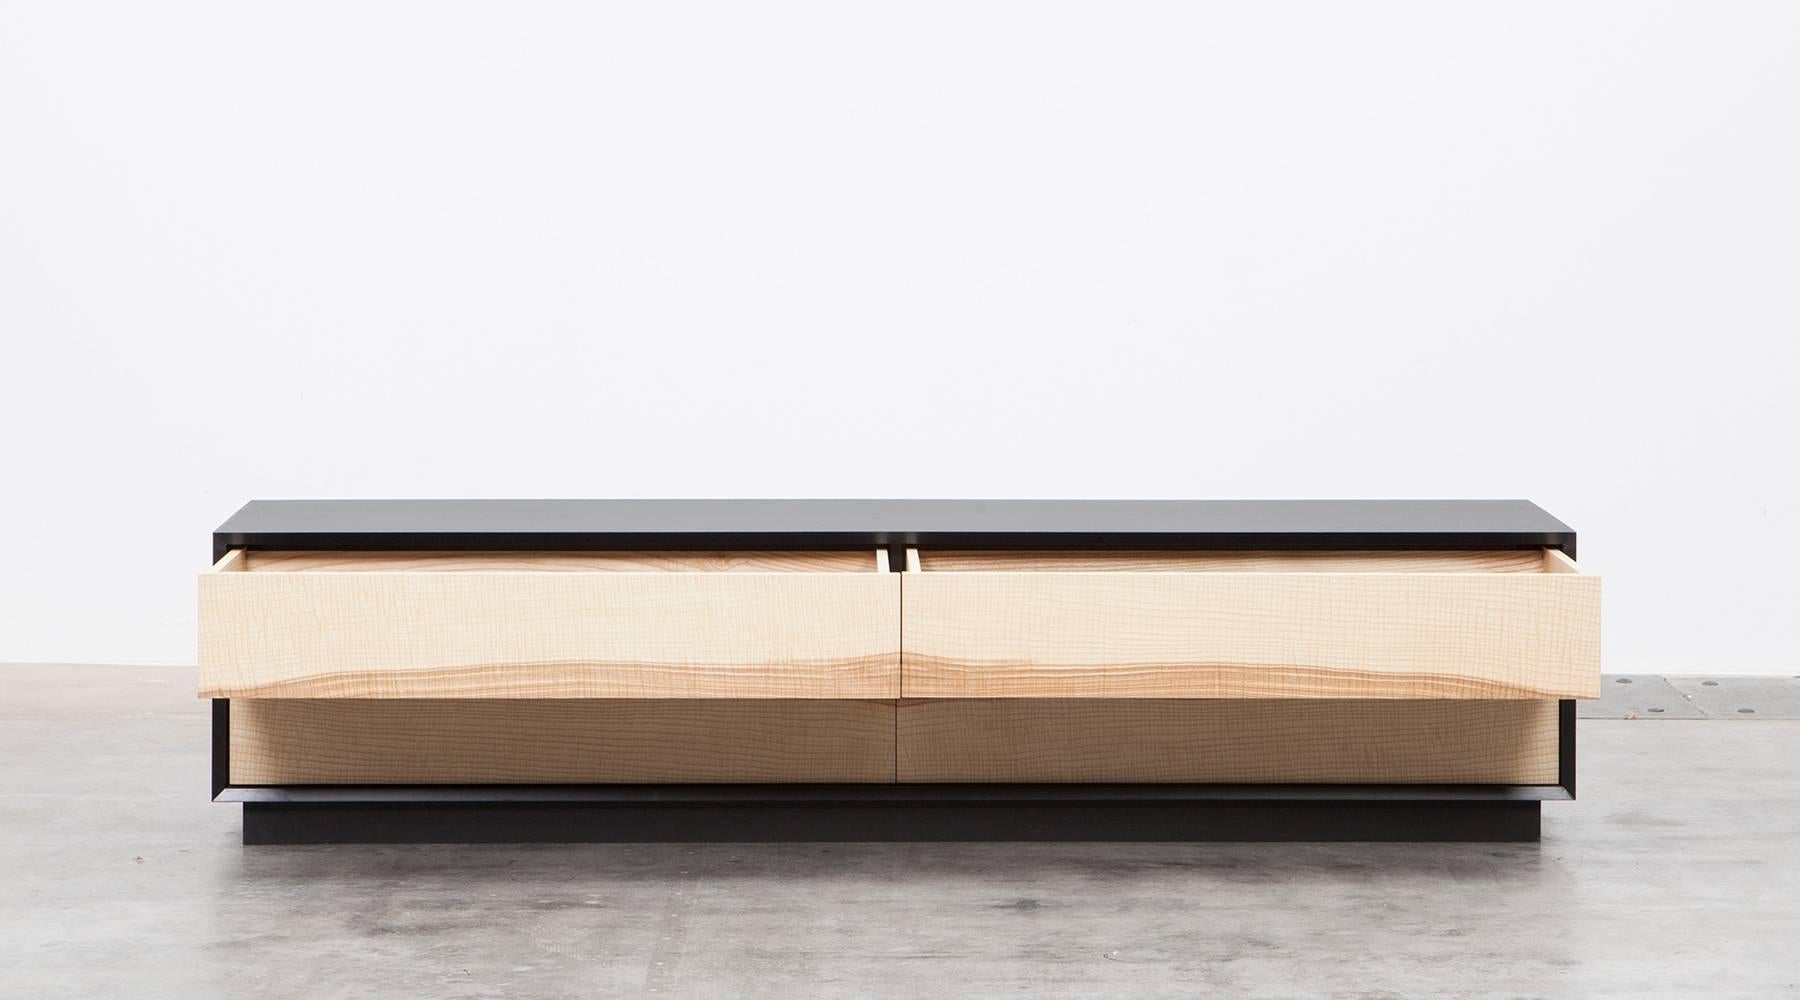 Sideboard by contemporary German artist Johannes Hock. The front of the doors of this unique piece comes light charming ash without handles to the outside. The inside life of the four drawers are designed with red or black HPL, as well as the